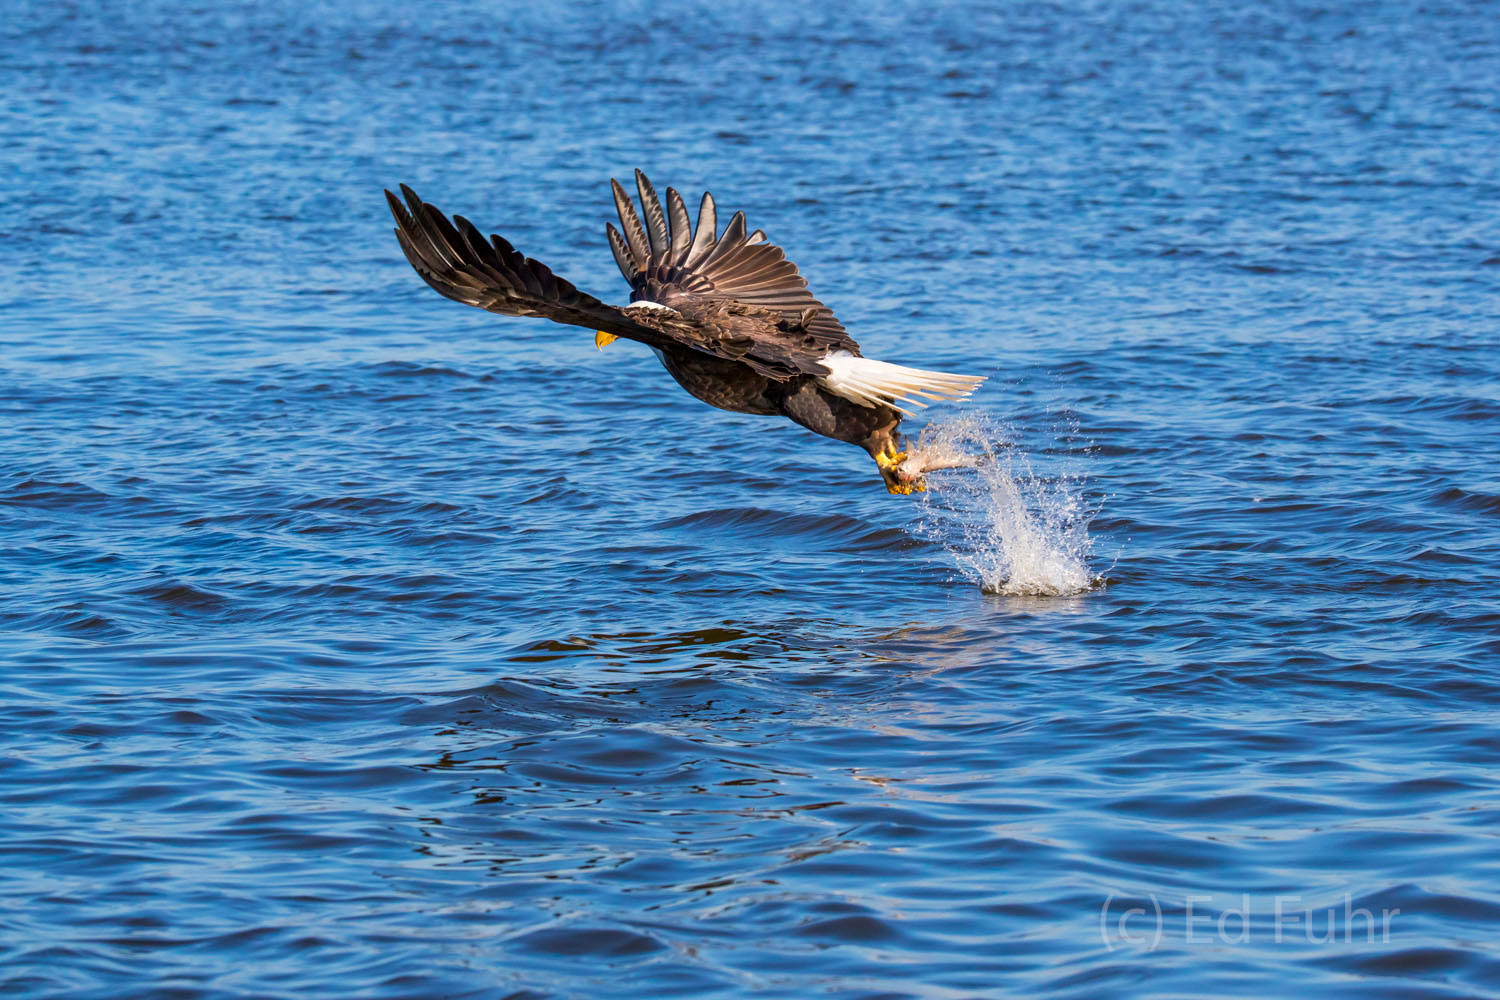 A bald eagle rises from the James River with dinner secured for herself and her young chicks.